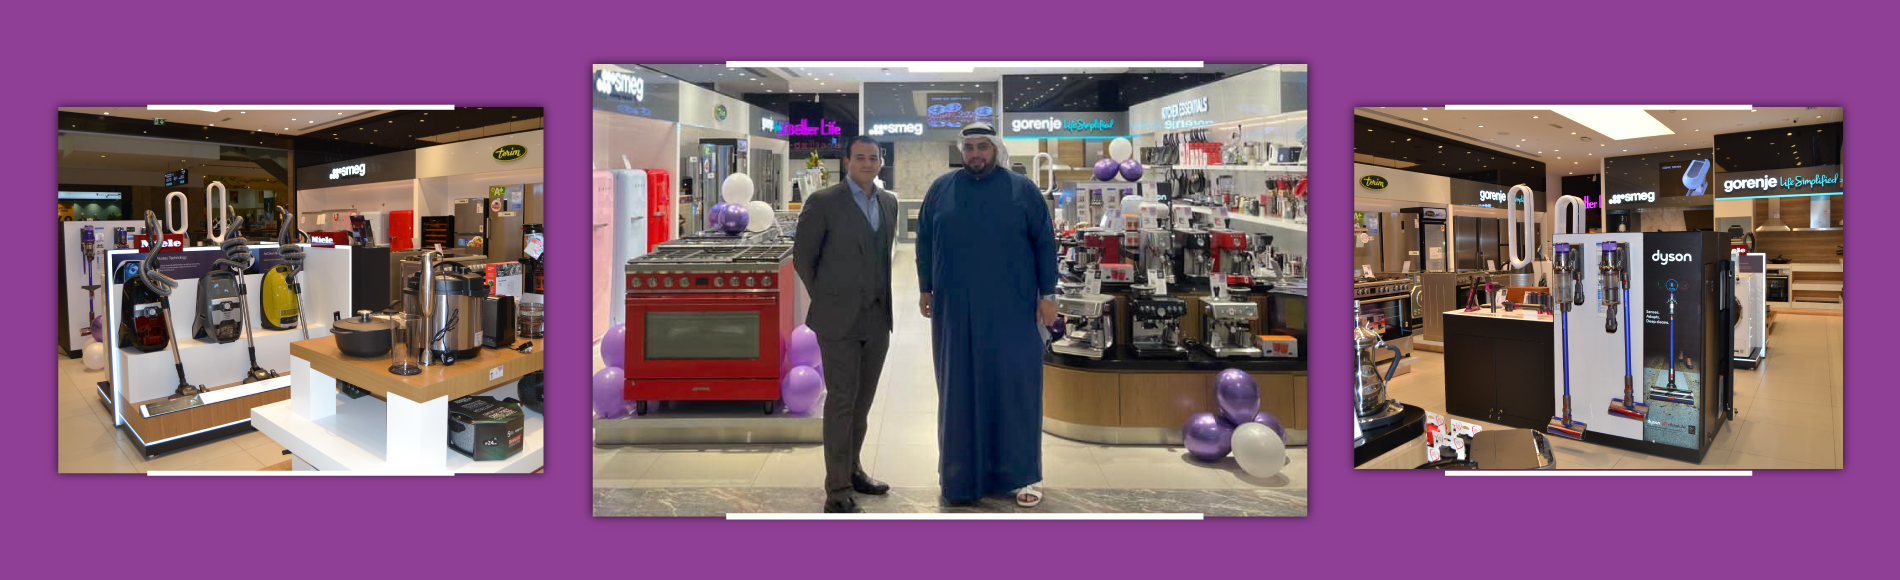 Better Life opens second retail store in Abu Dhabi